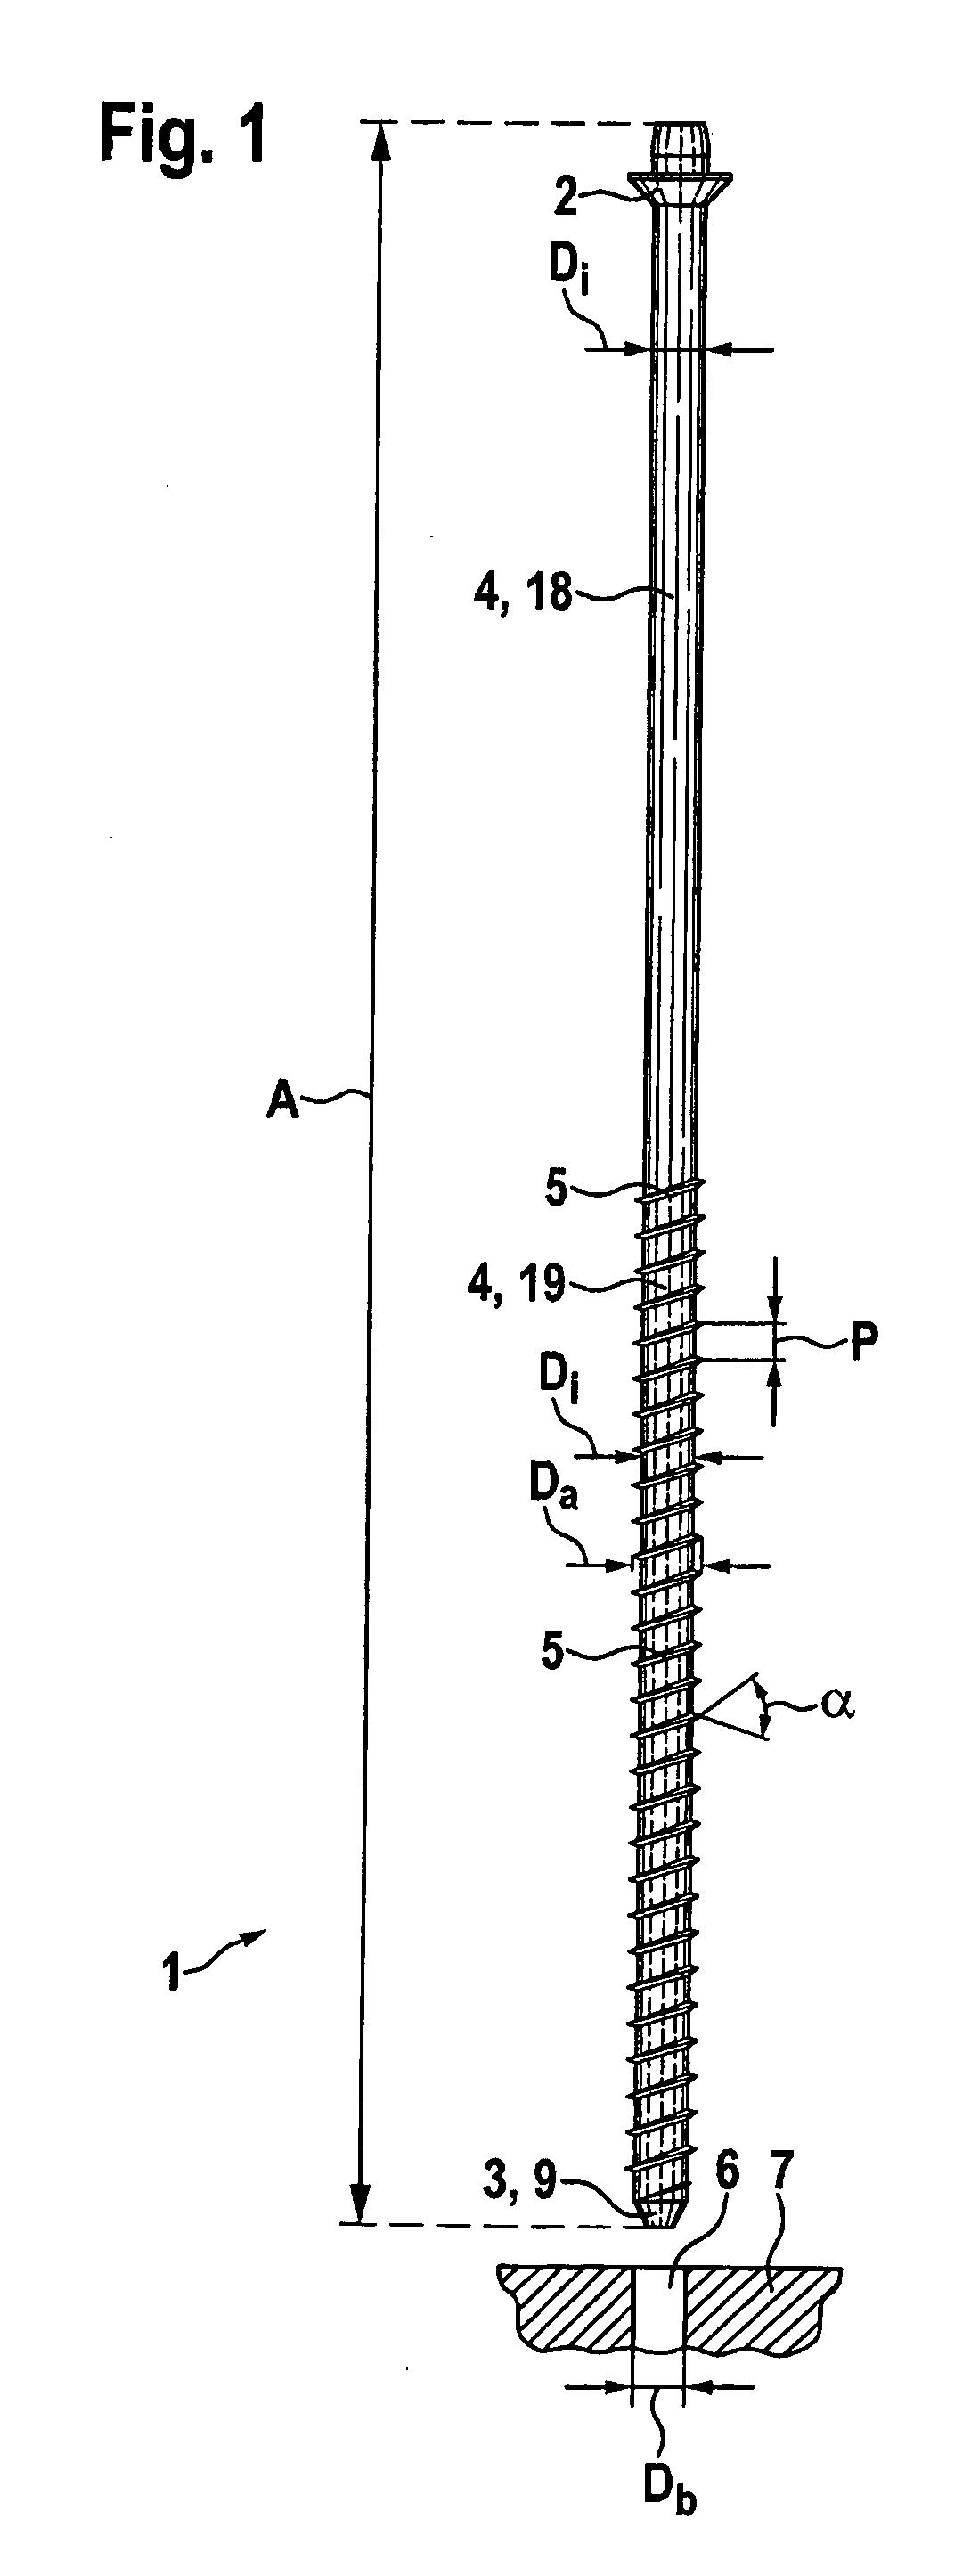 Reinforcement and/or anchor bolt